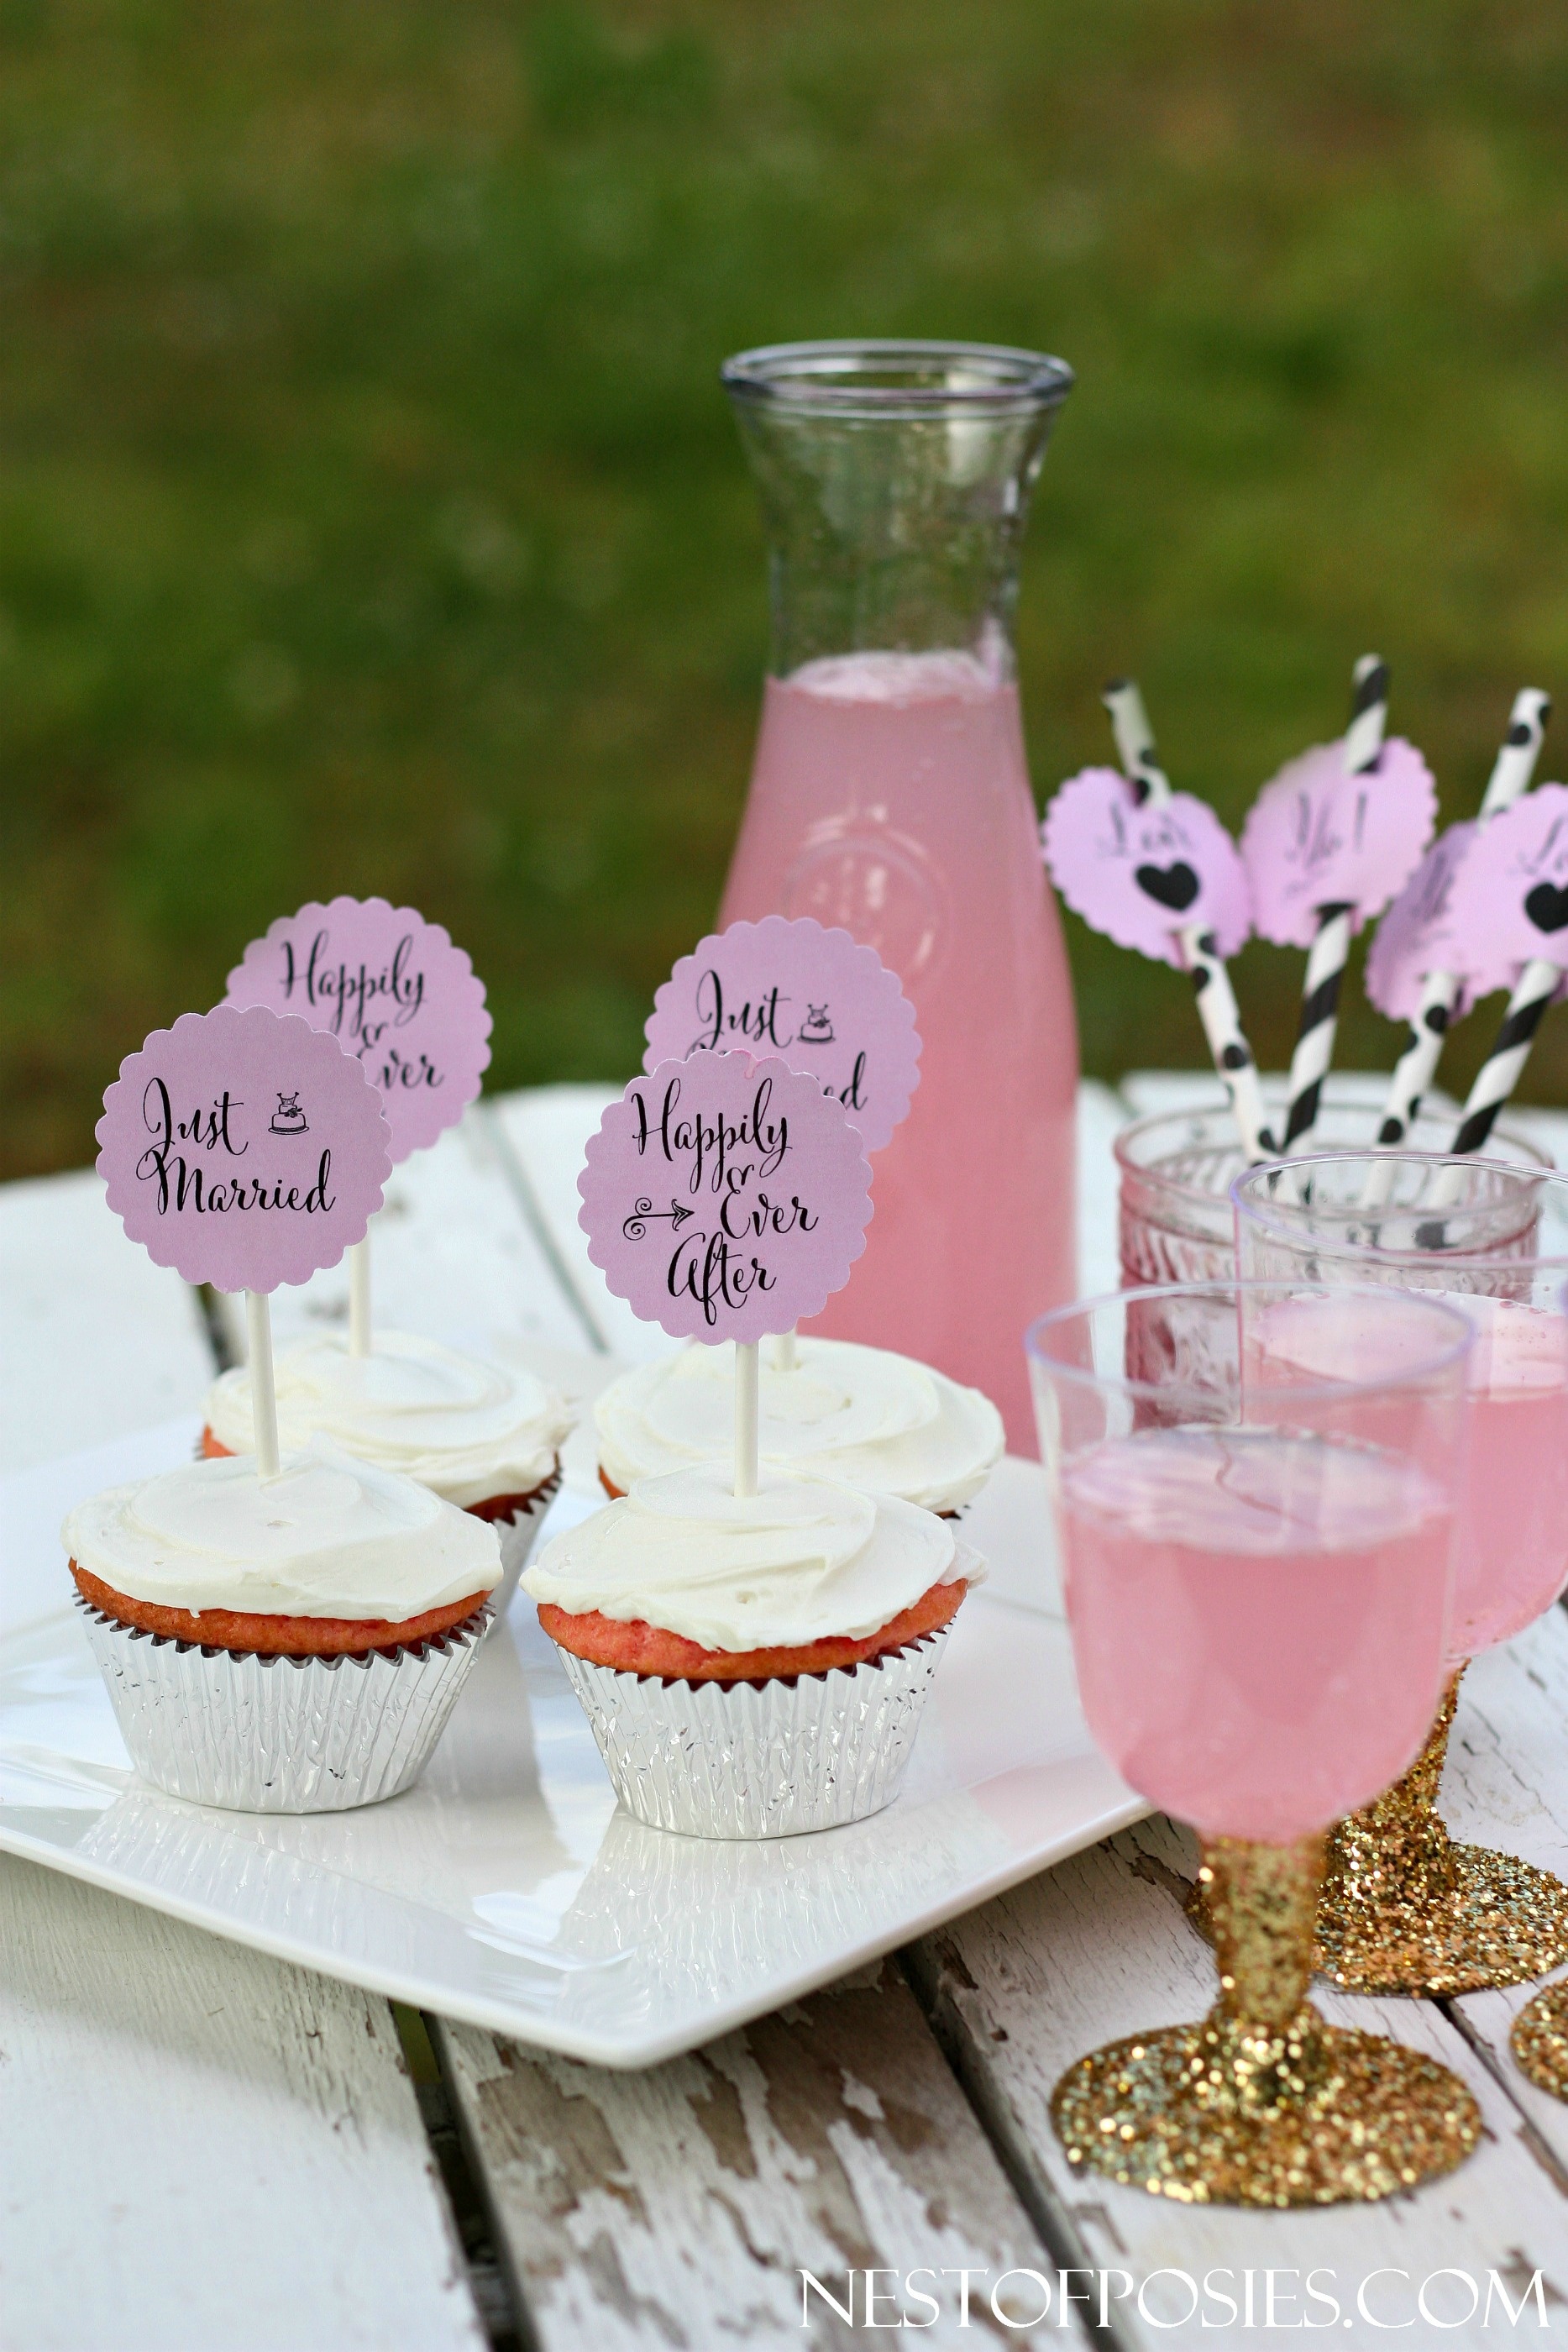 Wedding Or Bridal Shower Cupcake Toppers - Free Printable Cupcake Toppers Bridal Shower